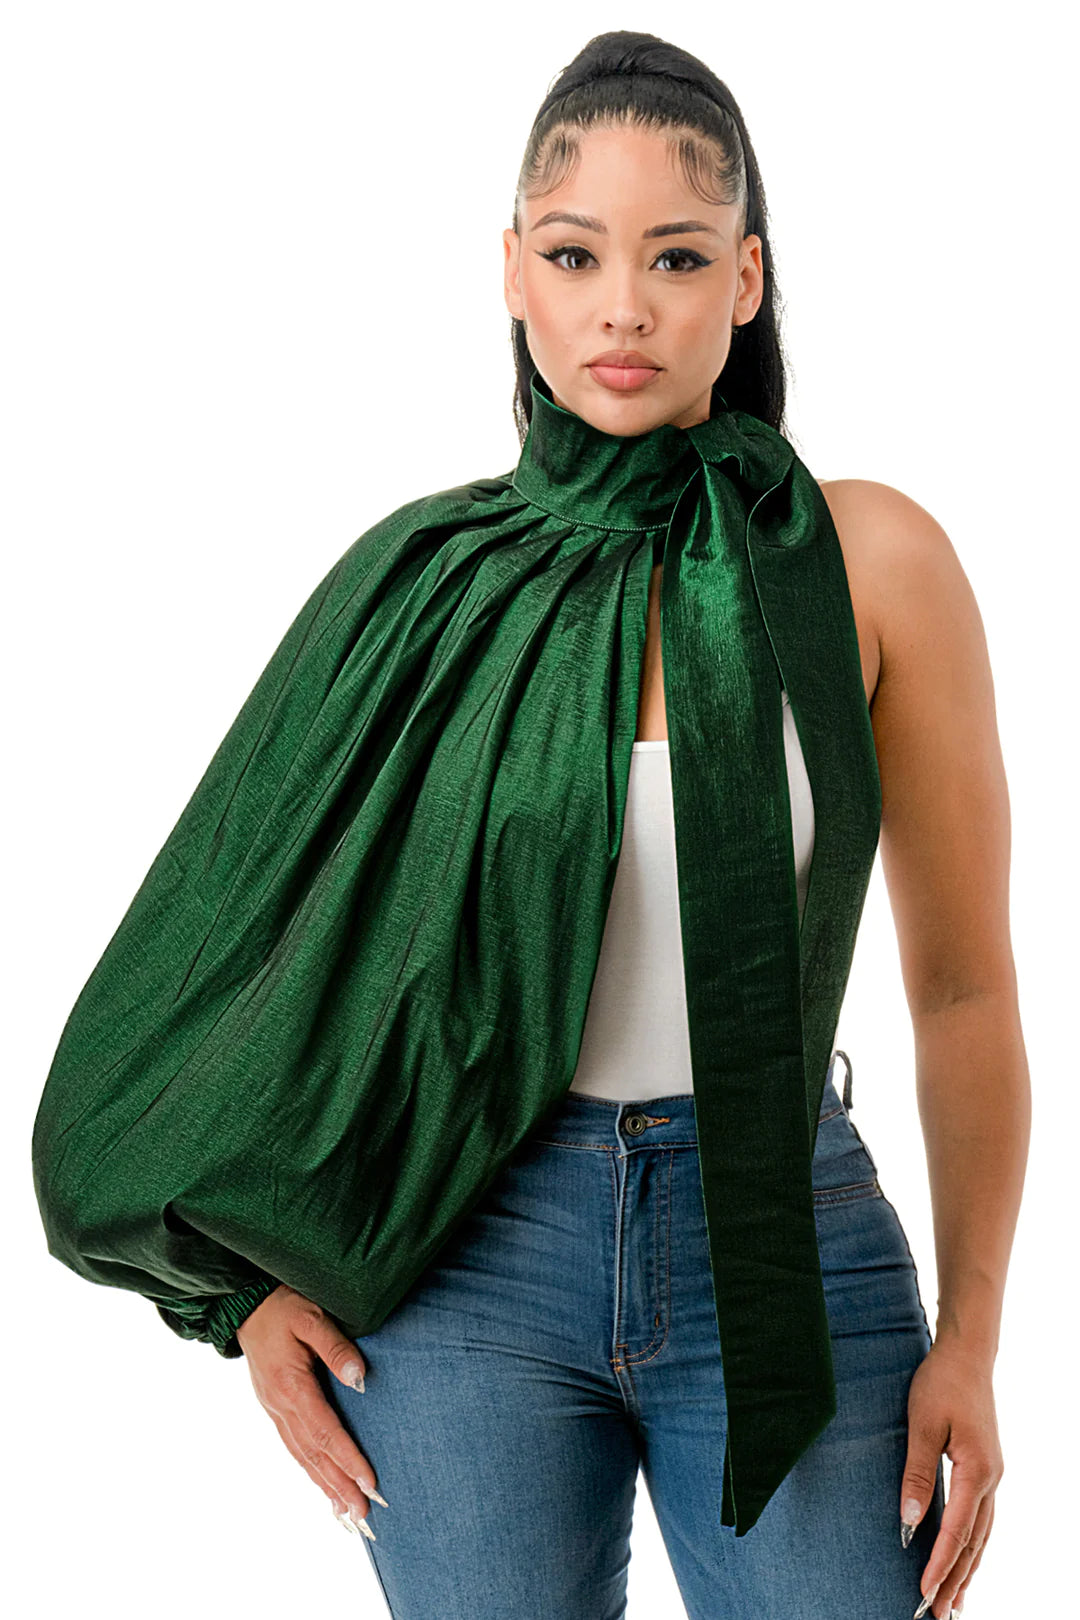 Hanna One sided Tie Top  (Emerald)